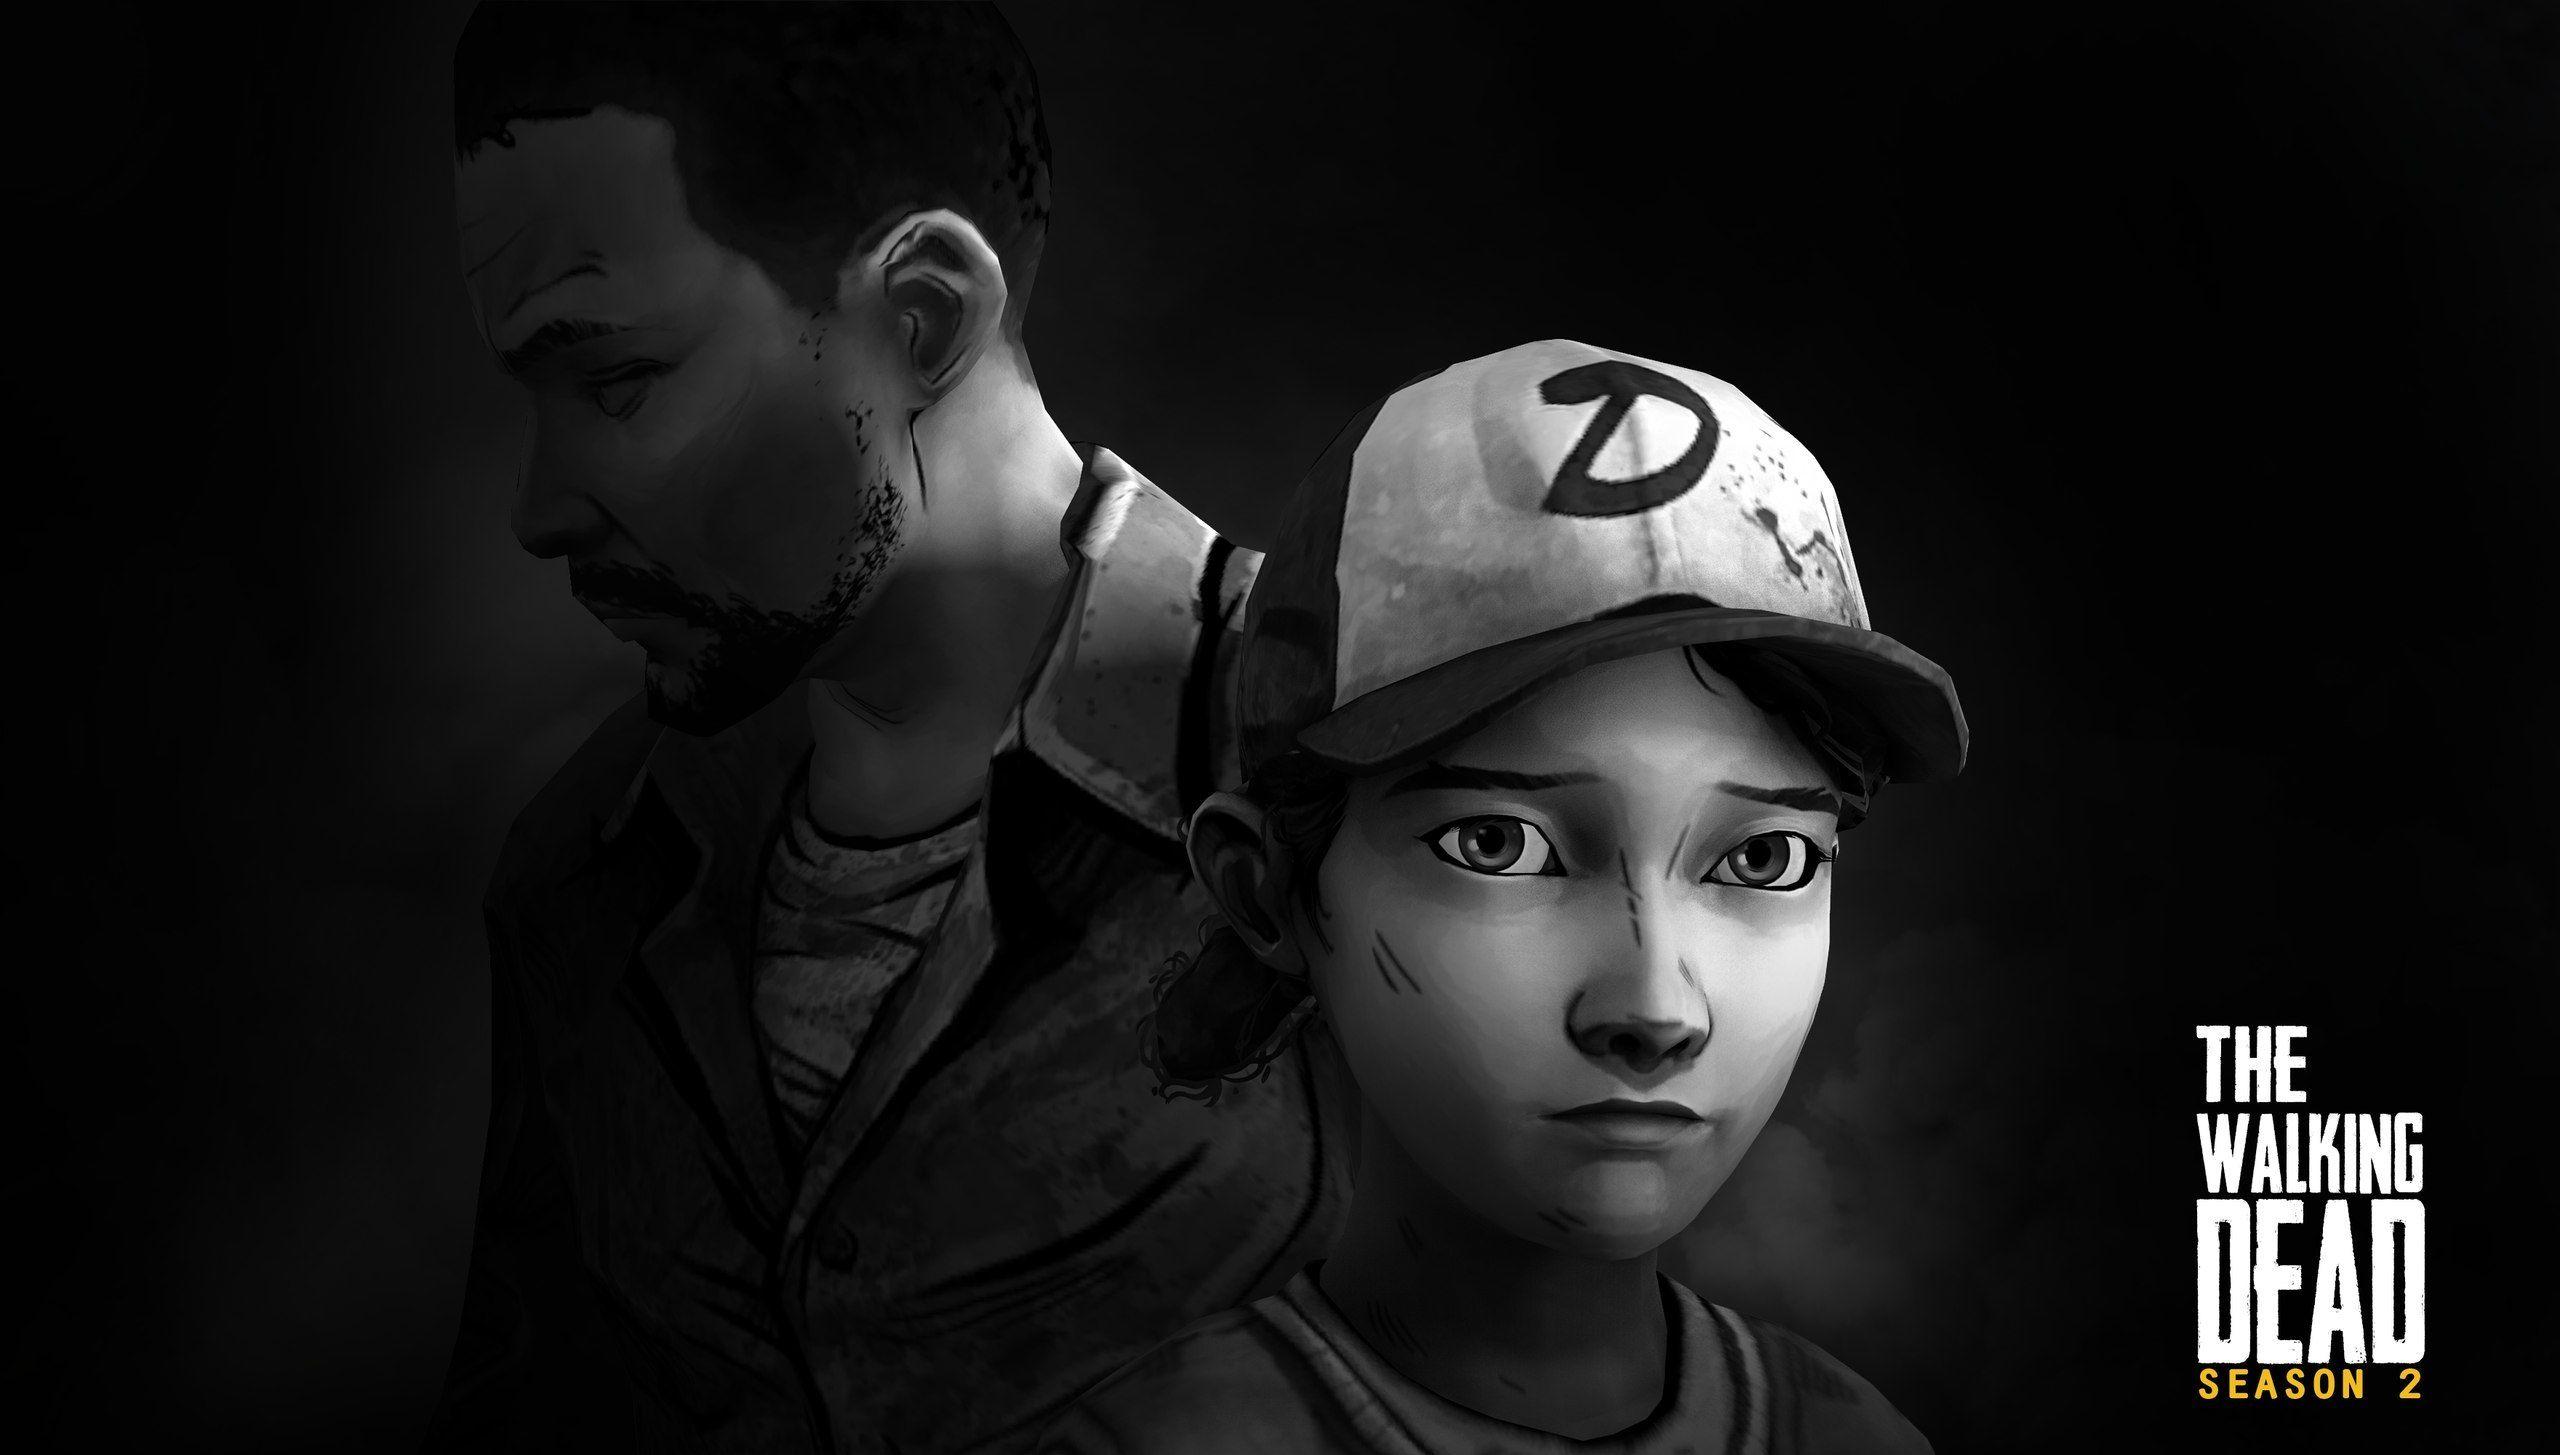 Lee And Clementine Full HD Wallpaper